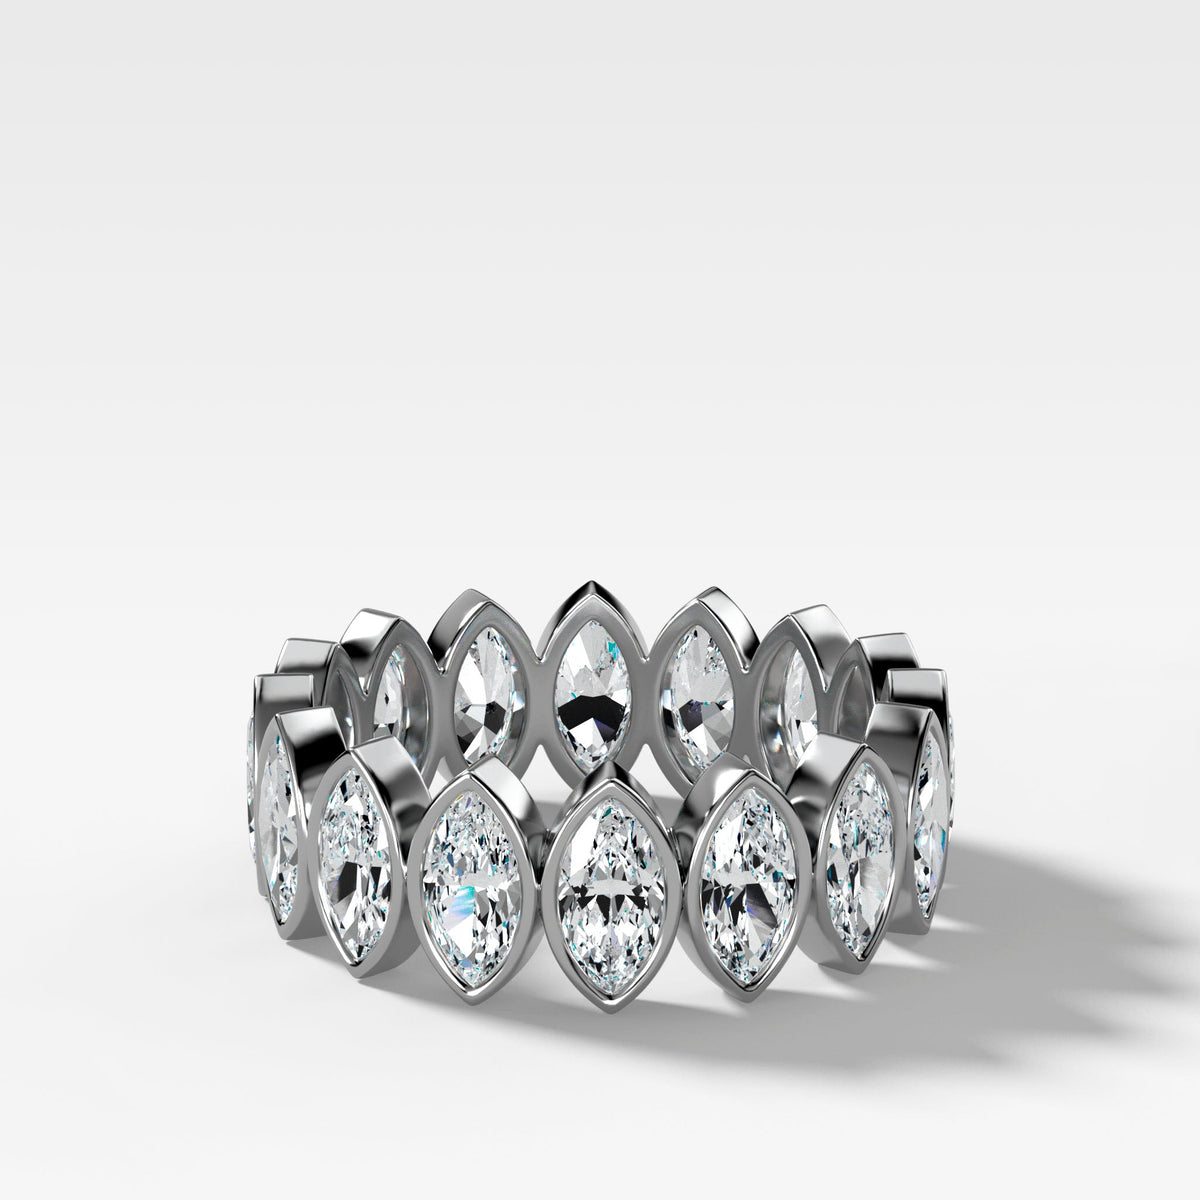 Midi Bezel Set Eternity Band With Marquise Cuts in White Gold by Good Stone